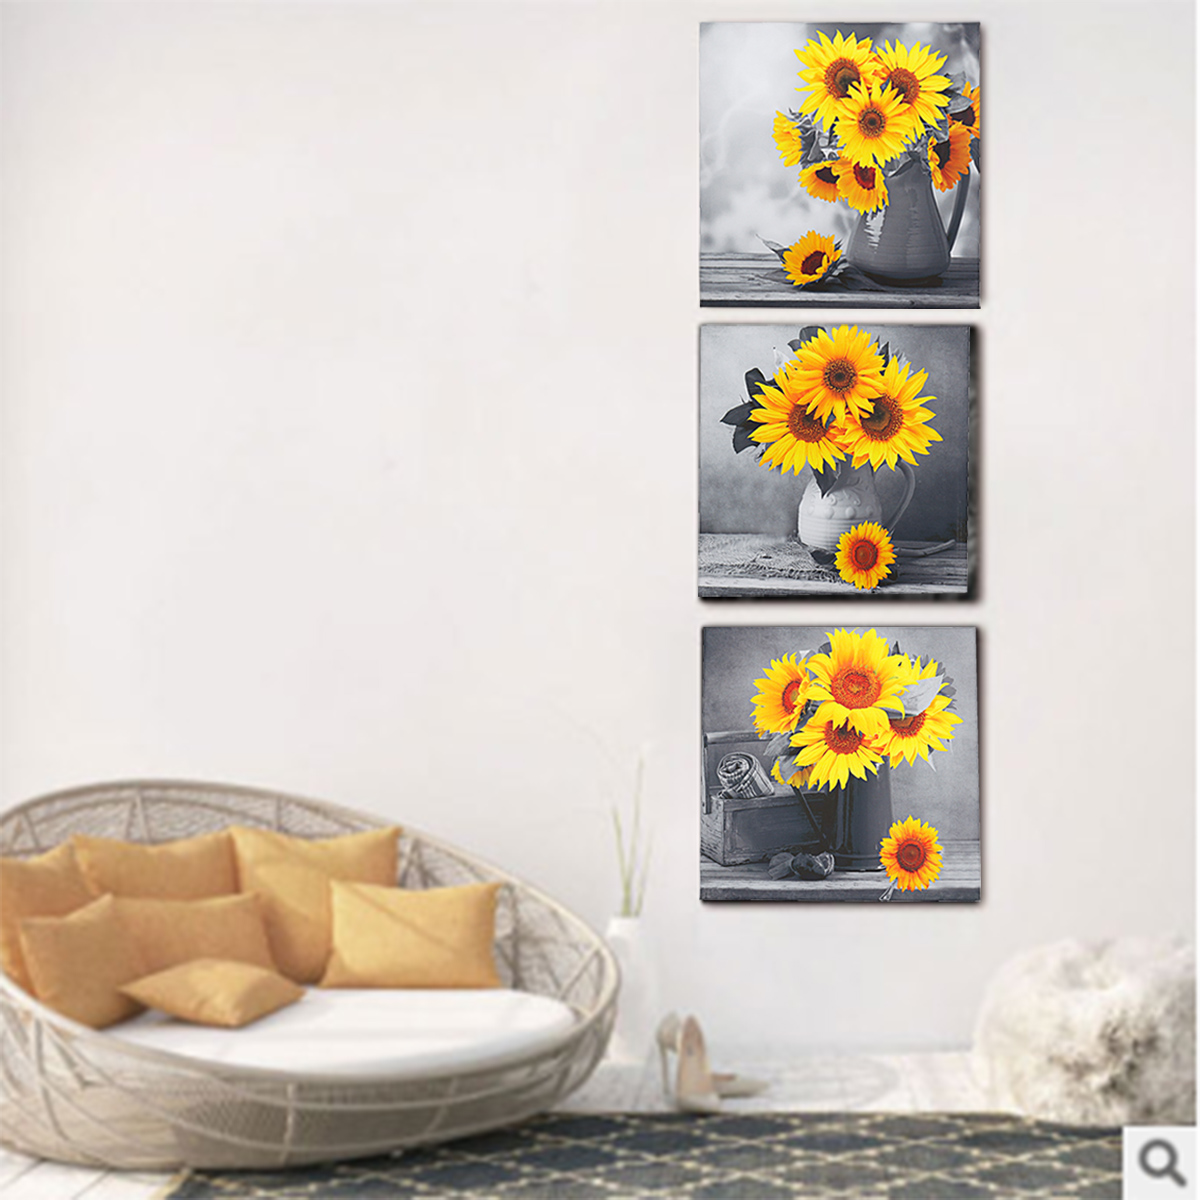 30303-cm-Sunflower-Wall-Art-Painting-Living-Room-Bedroom-Hanging-Canvas-Pictures-Office-Mural-Decora-1791798-11